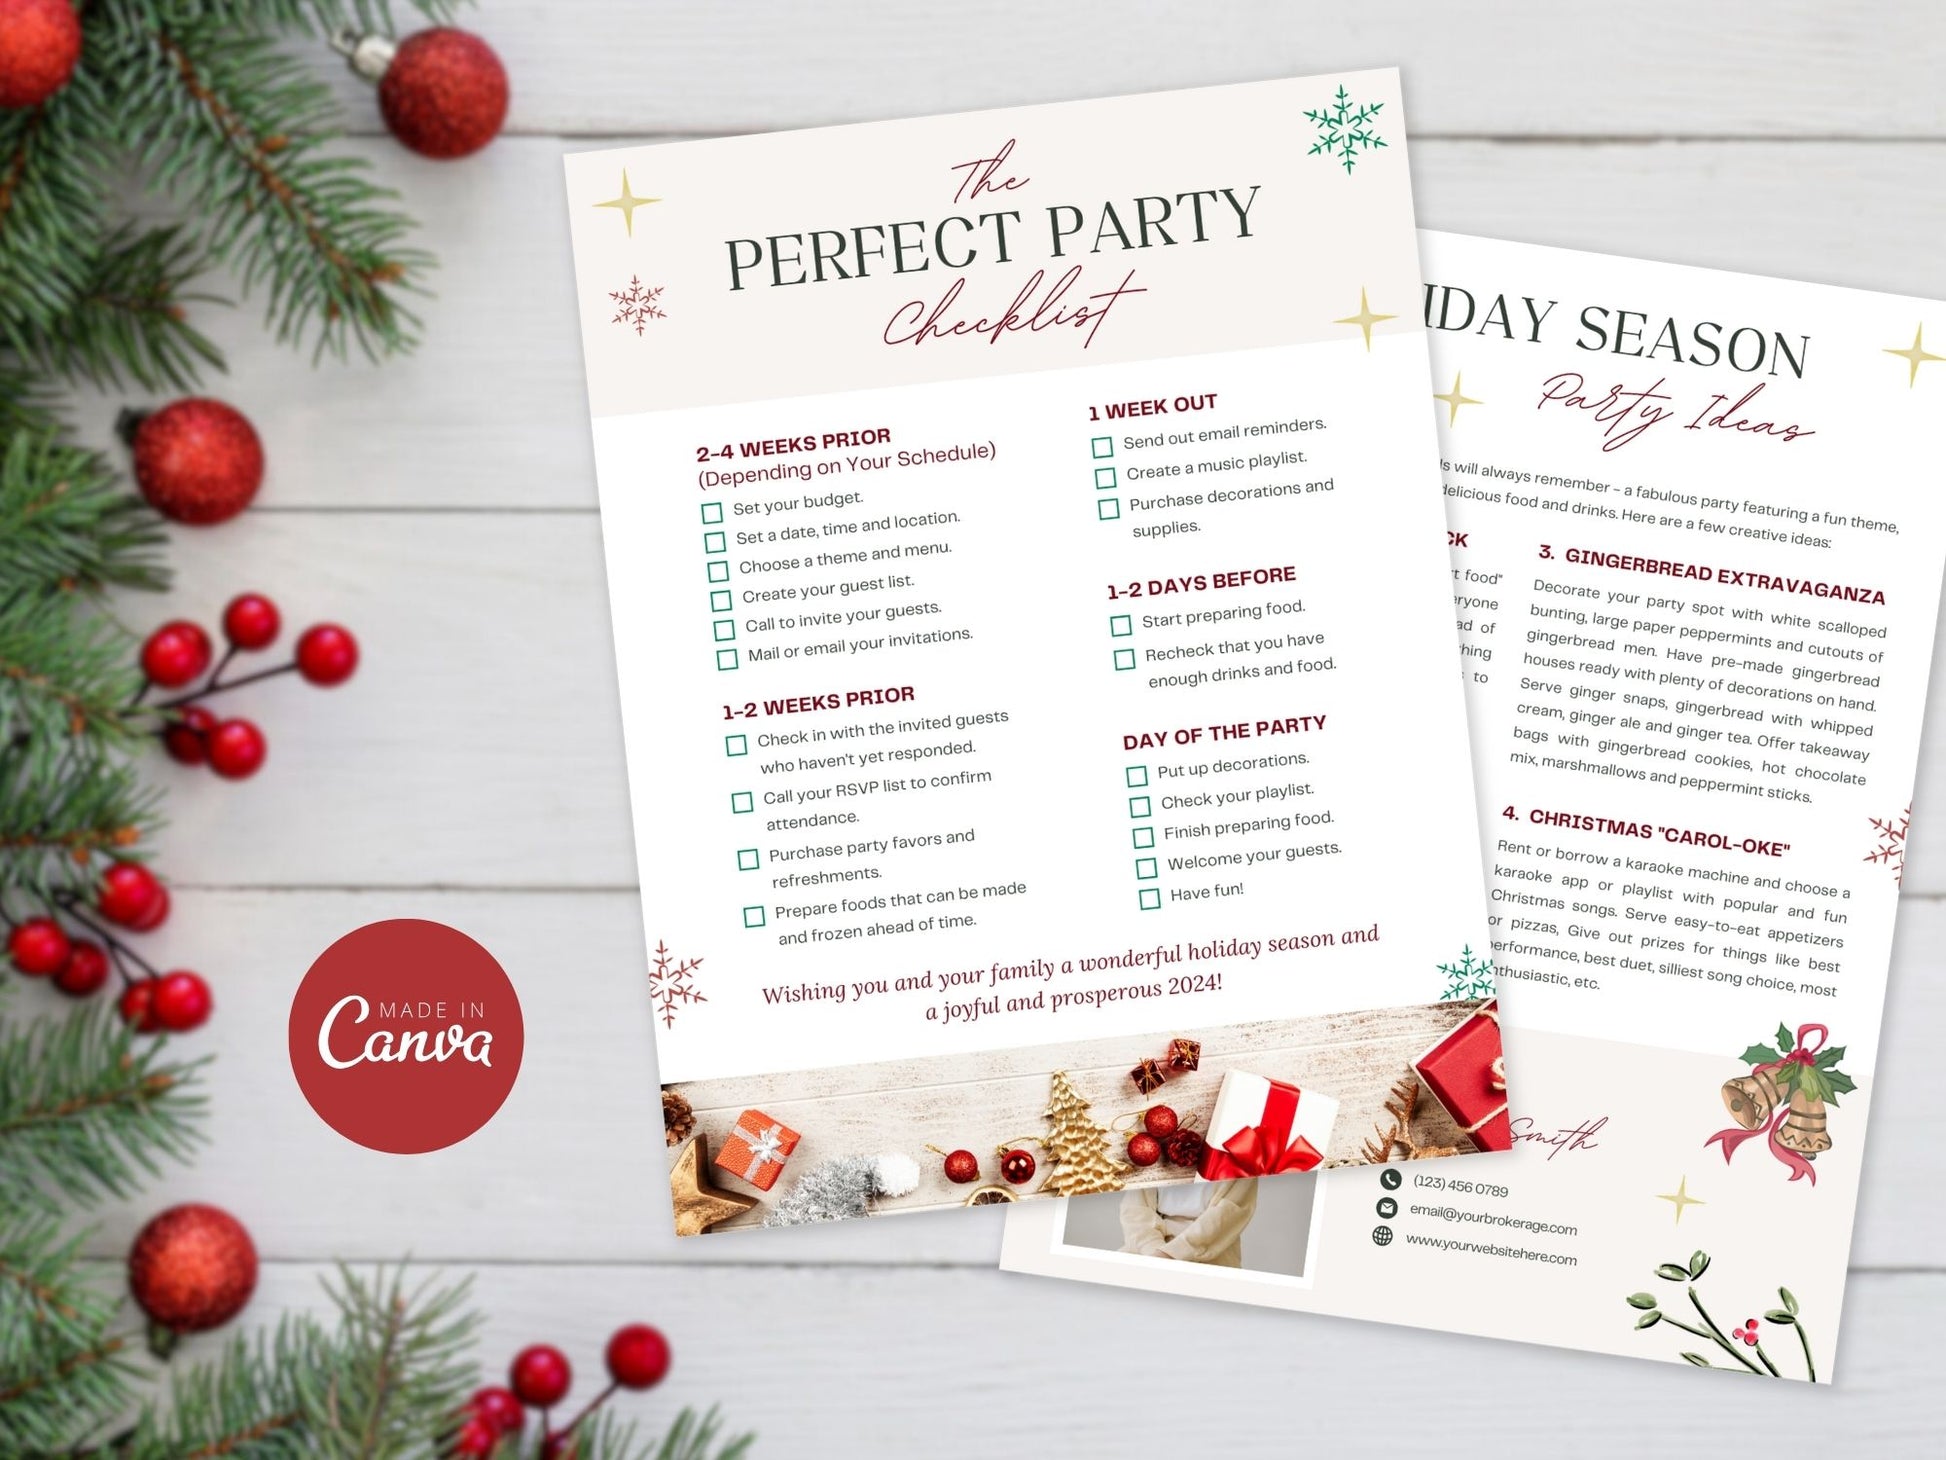 Christmas Holiday Newsletter - Elevate your marketing with festive tips. 'The Perfect Party Checklist' and 'Holiday Season Party Ideas' pages engage clients in holiday spirit, making this season memorable.